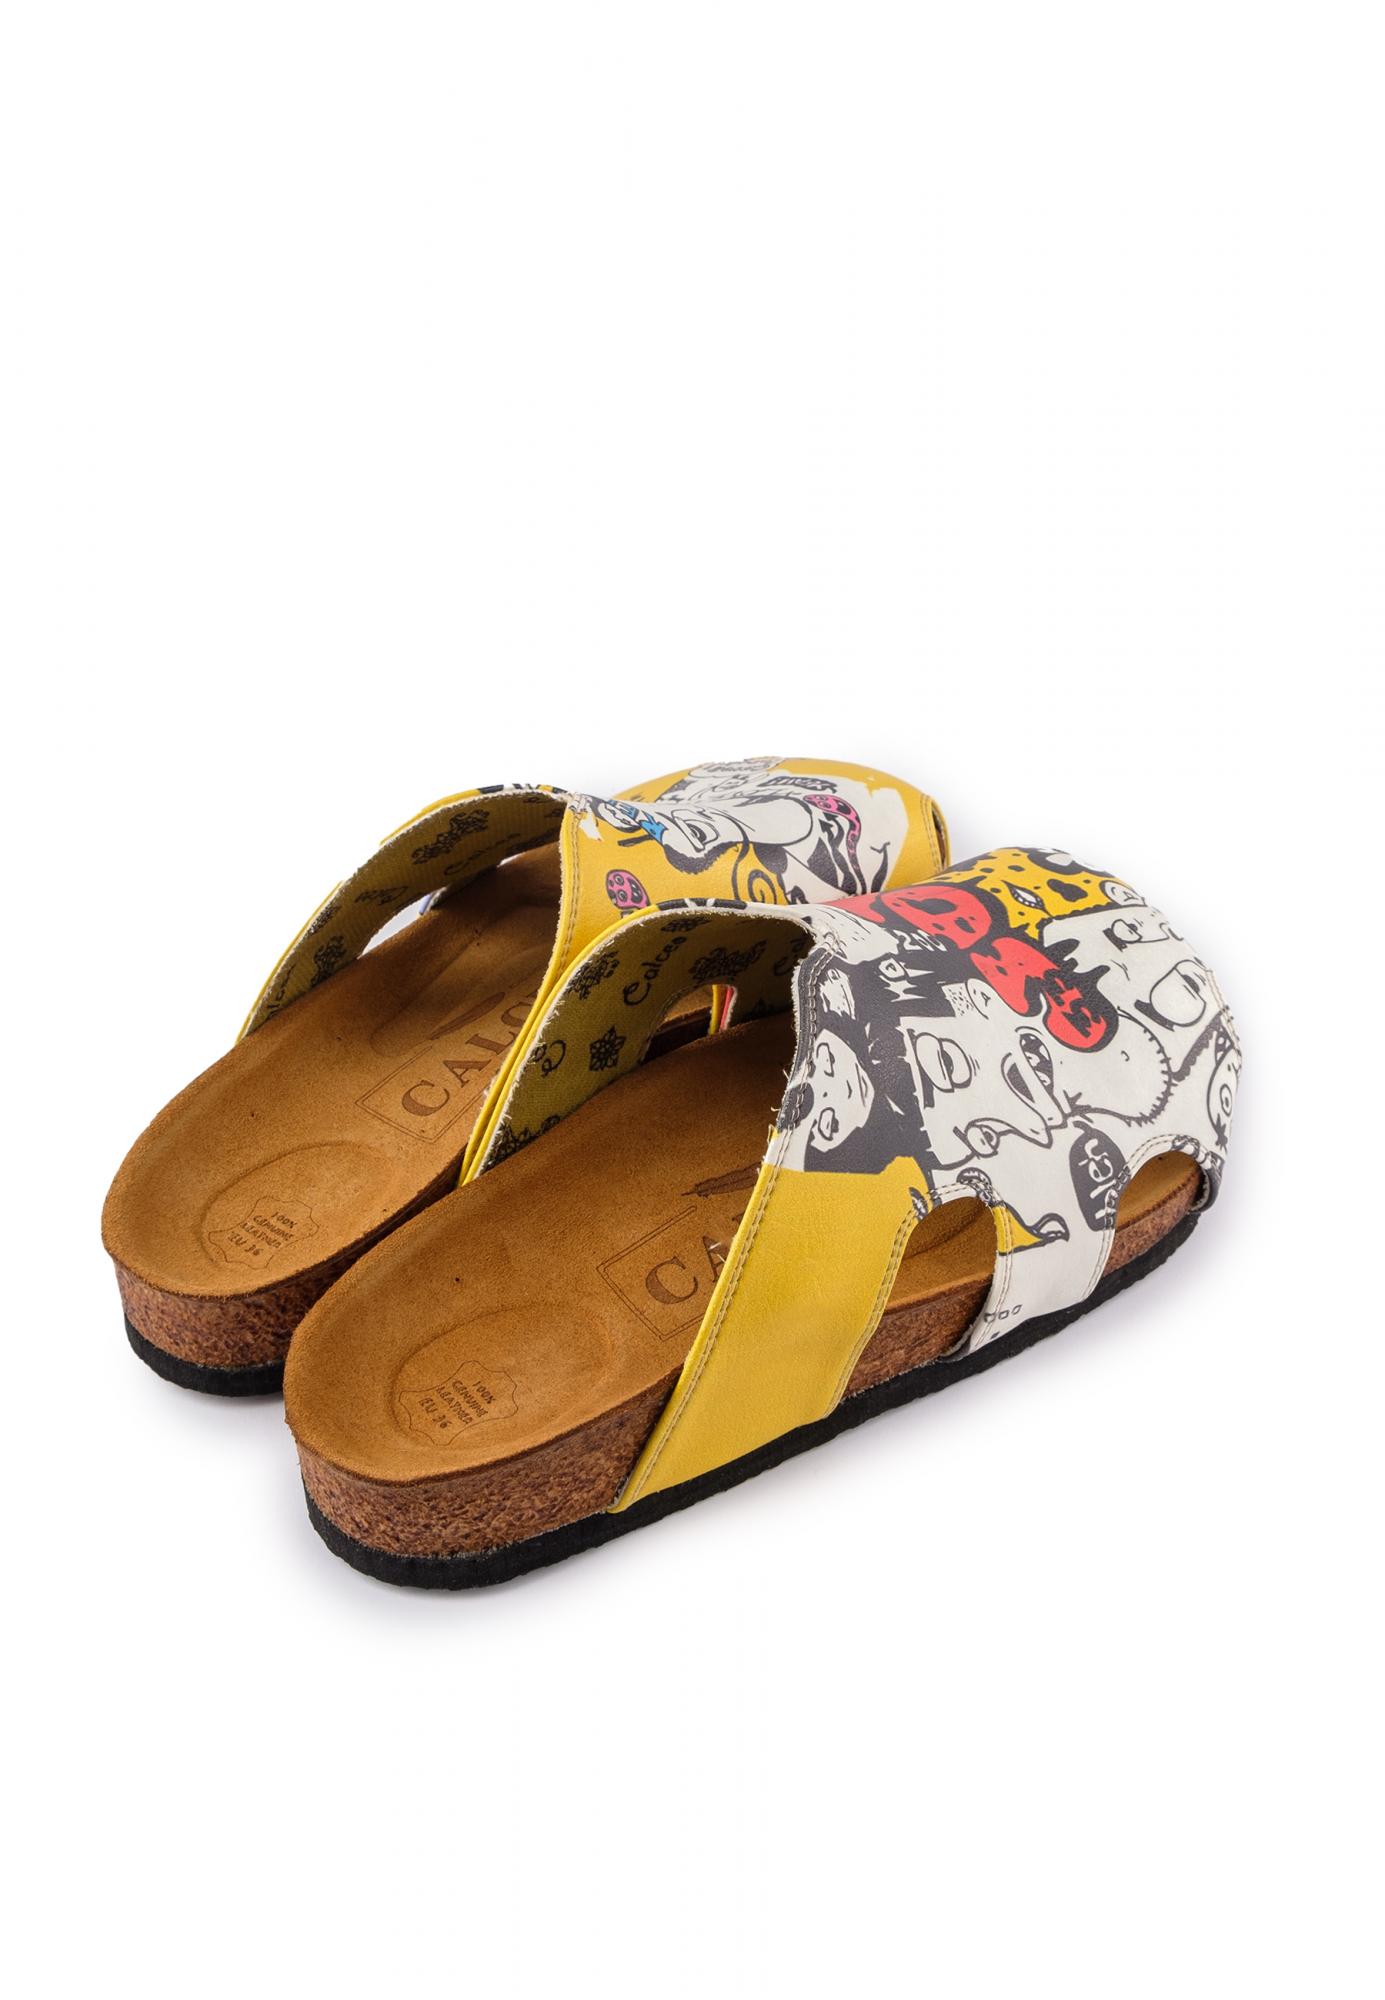 Patterned women clogs A608 - DRAWING - WHITE